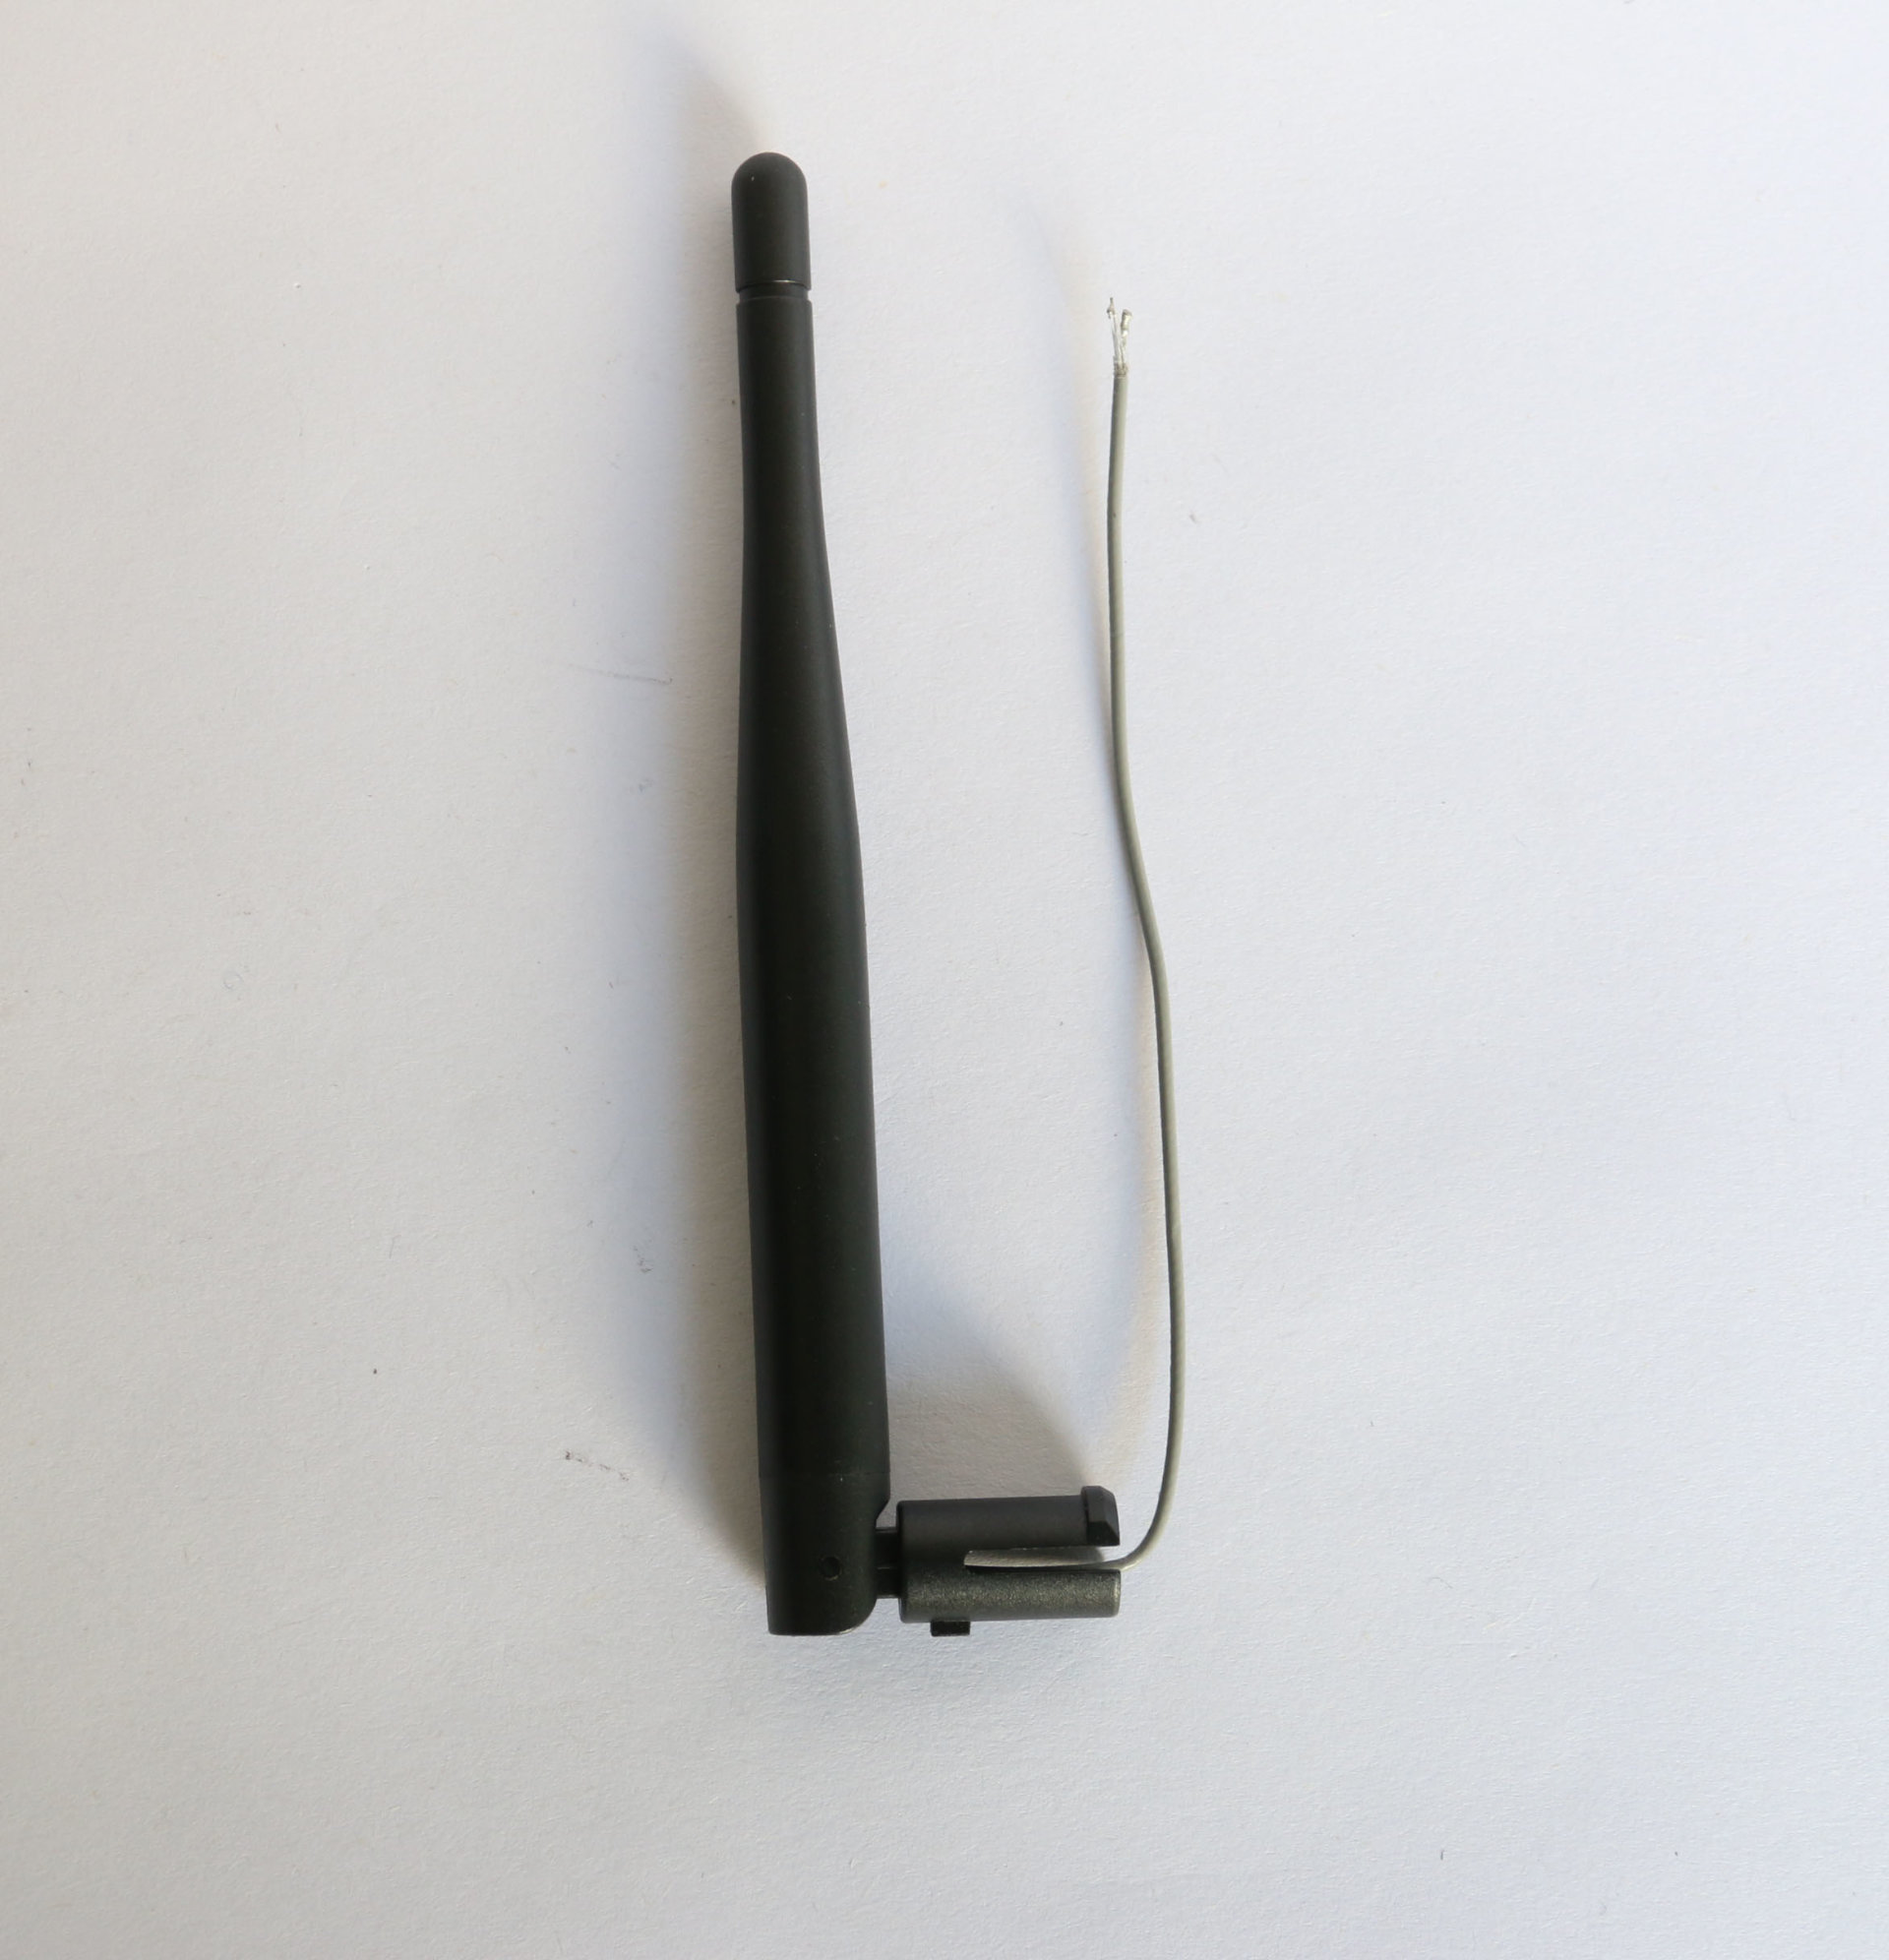 2.4G Antenna with Elbow OPEN SMA Male Antena Wifi For WLAN Router Booster